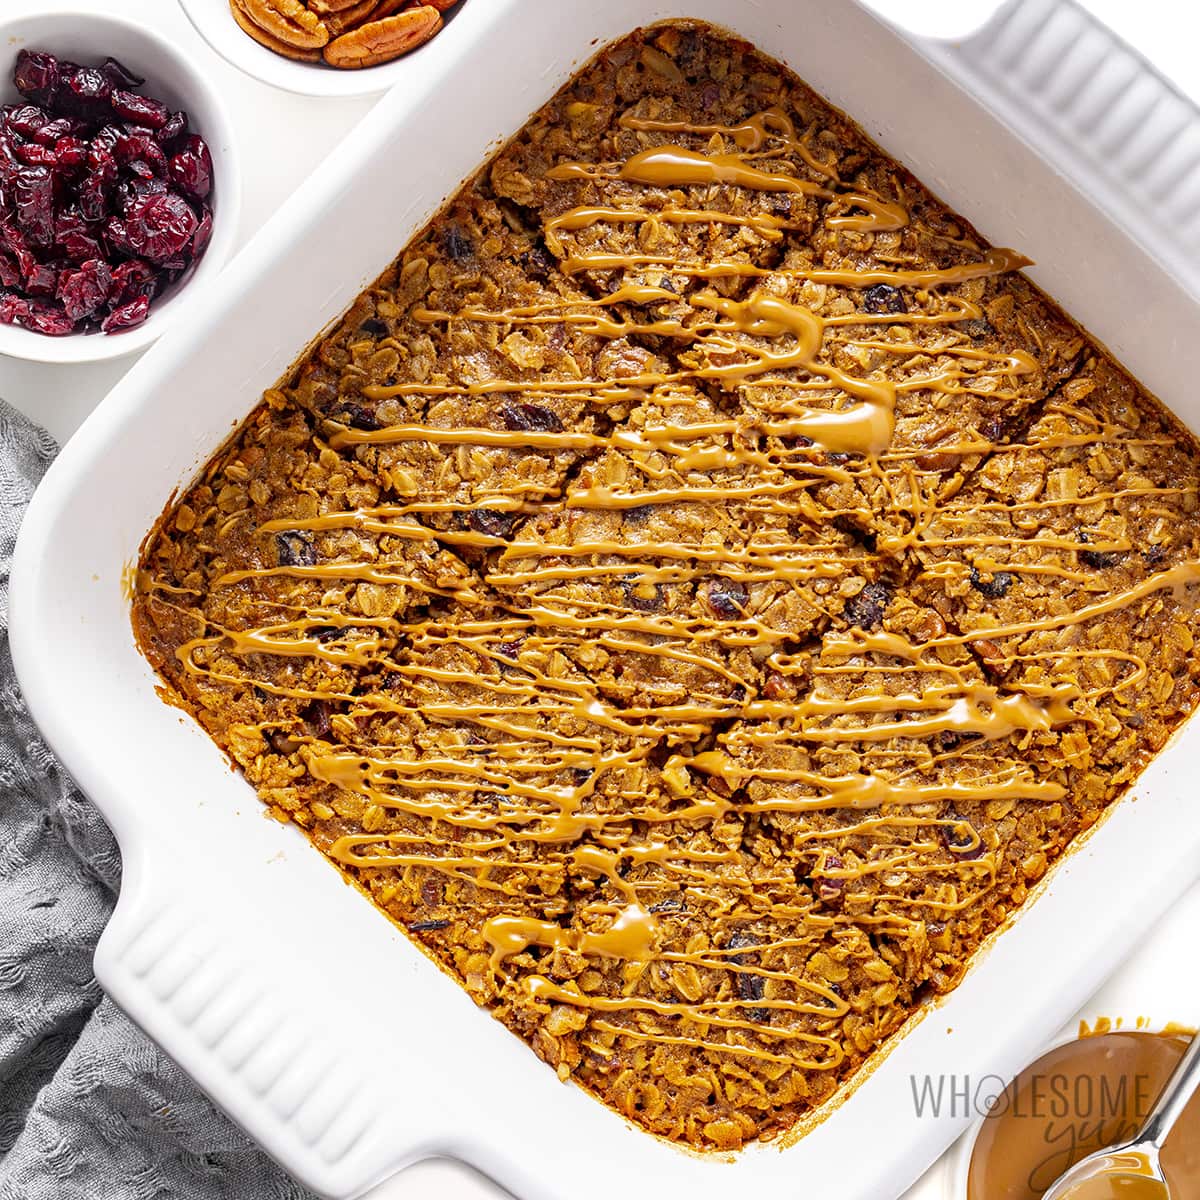 Baked oatmeal recipe with cookie butter drizzled on top.